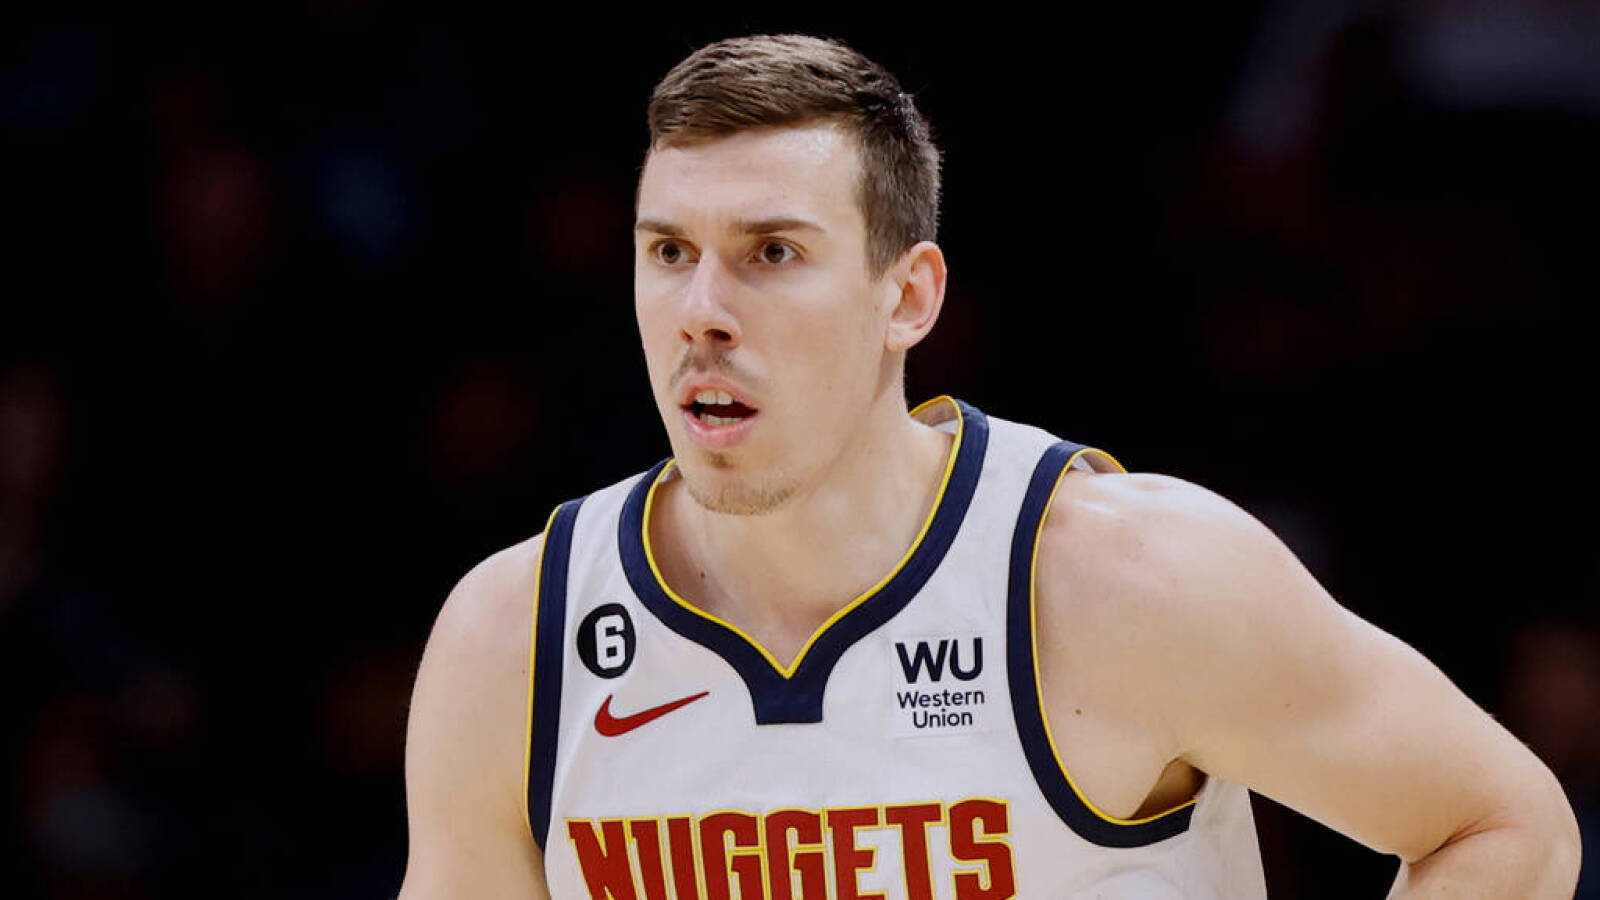 Nuggets champion suffers torn ACL during FIBA exhibition